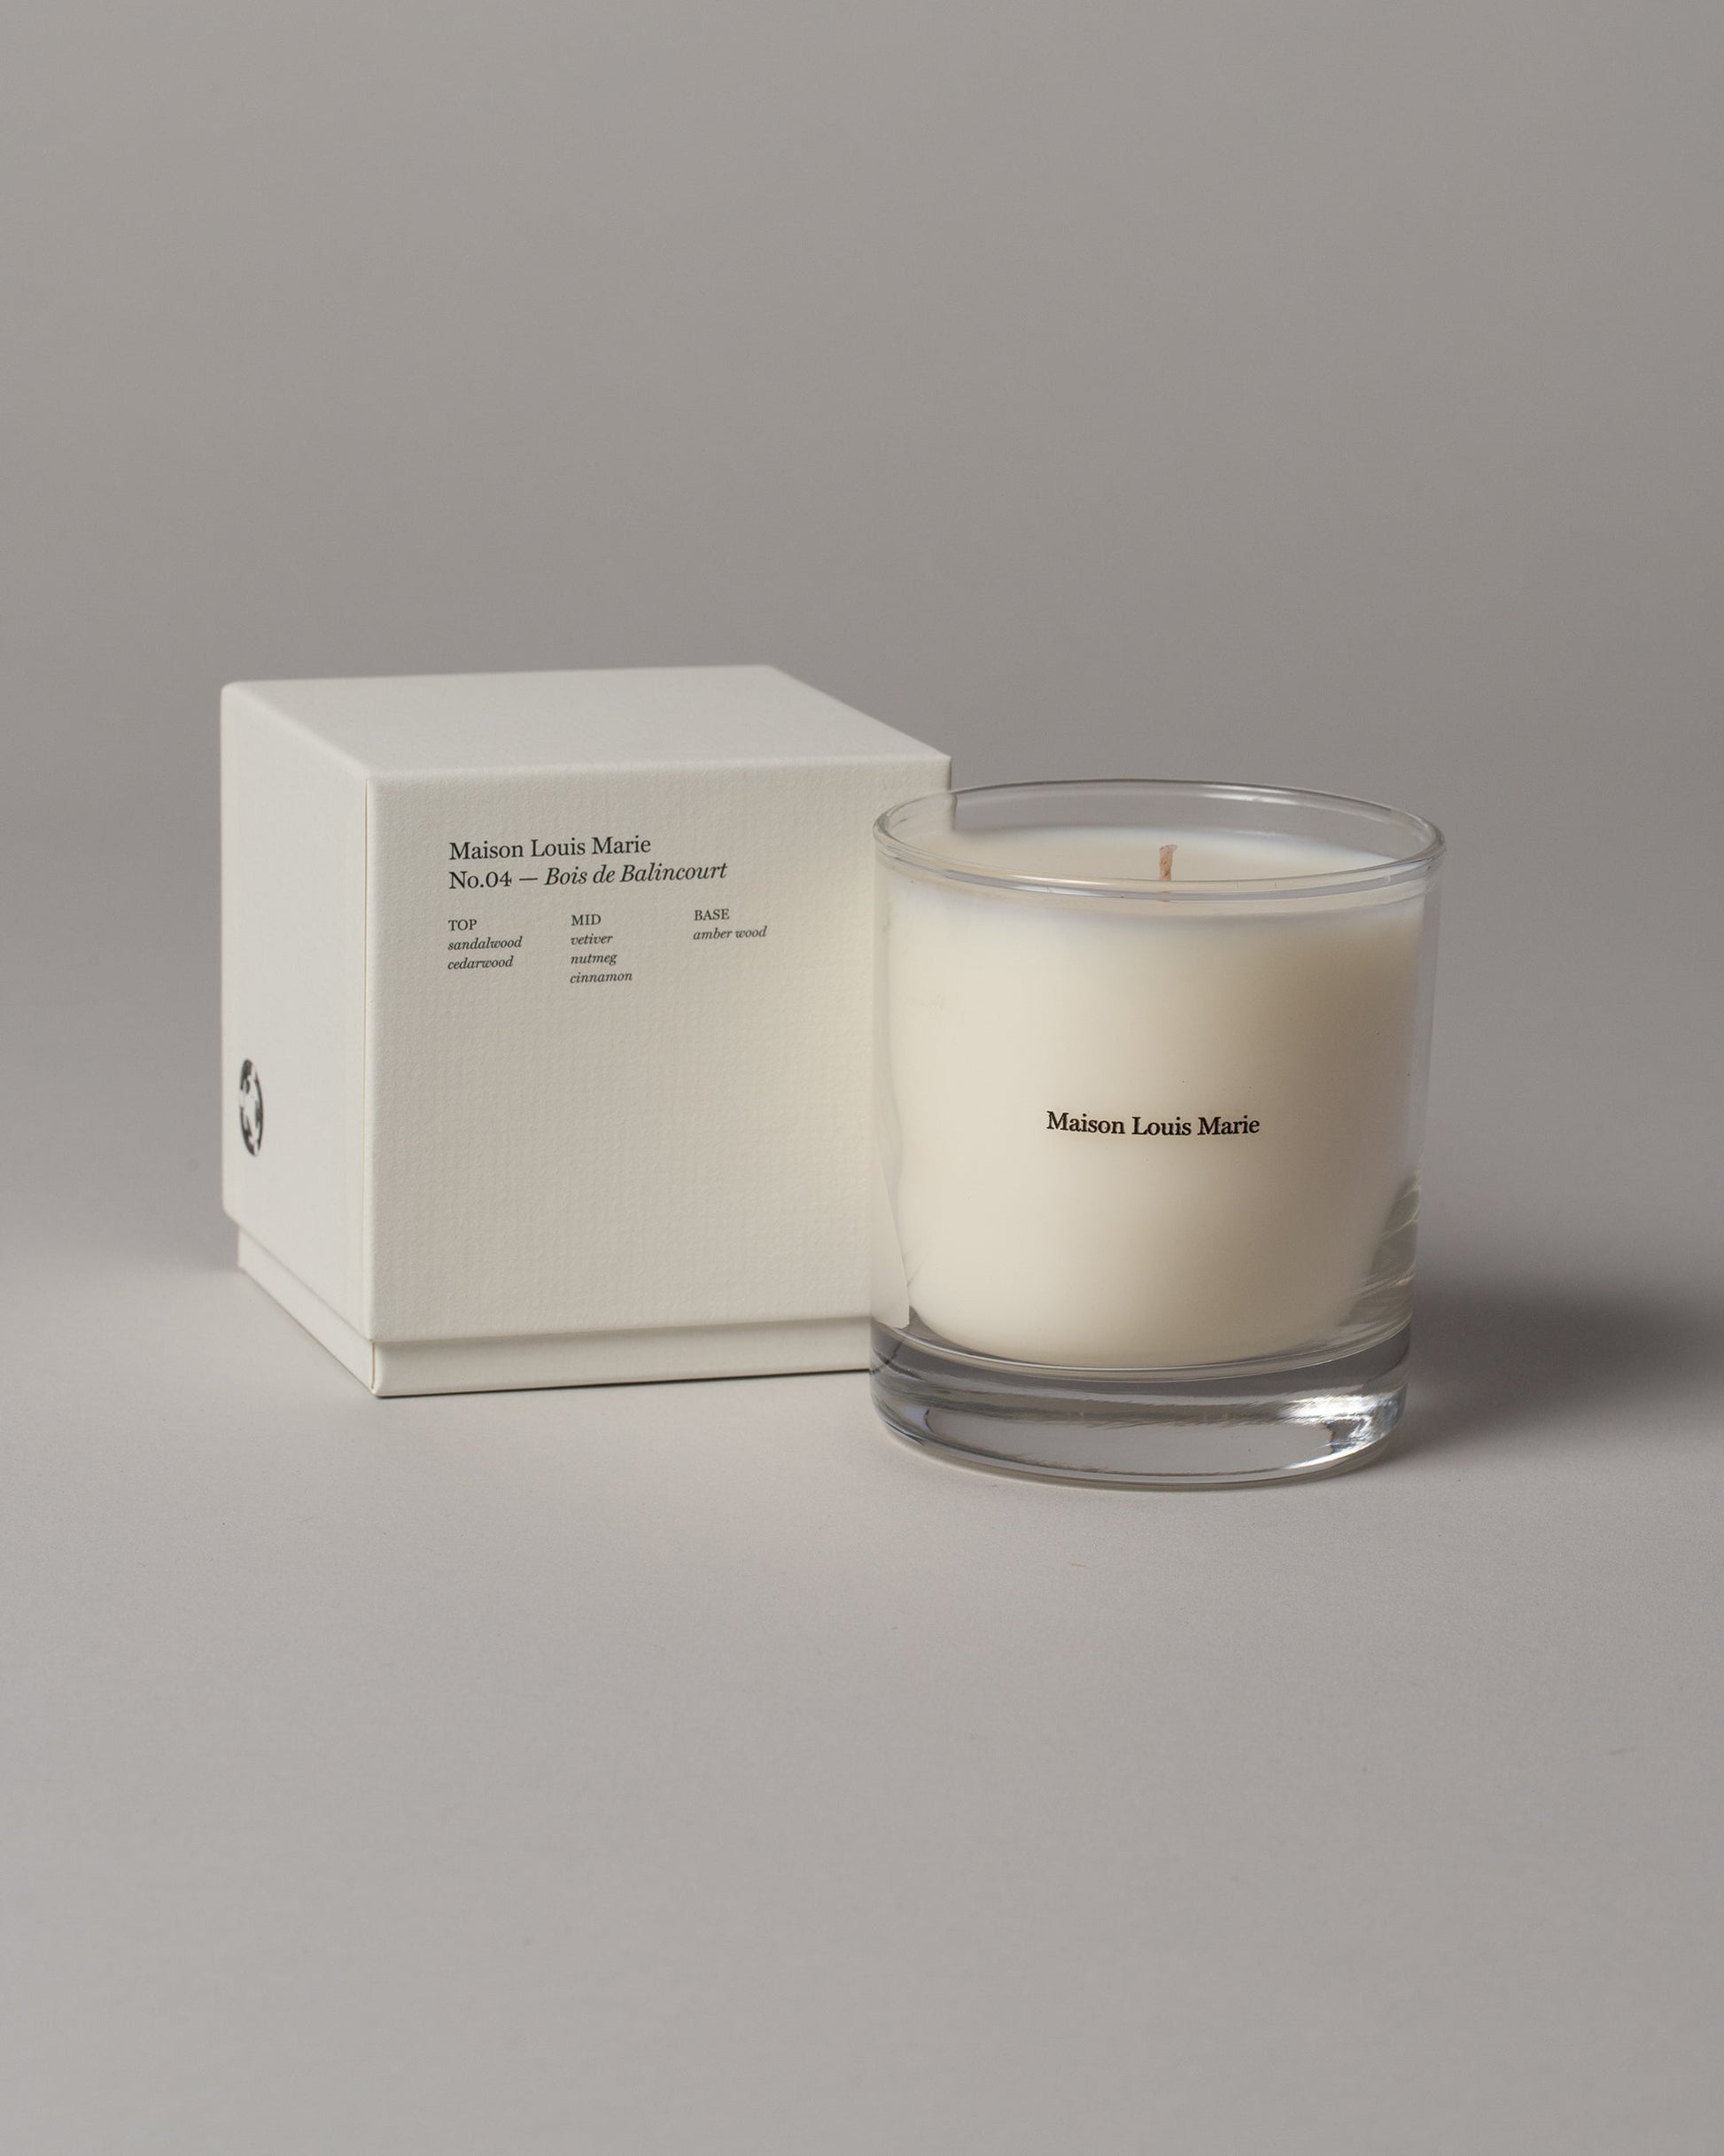  Maison Louis Marie Candle on light color background